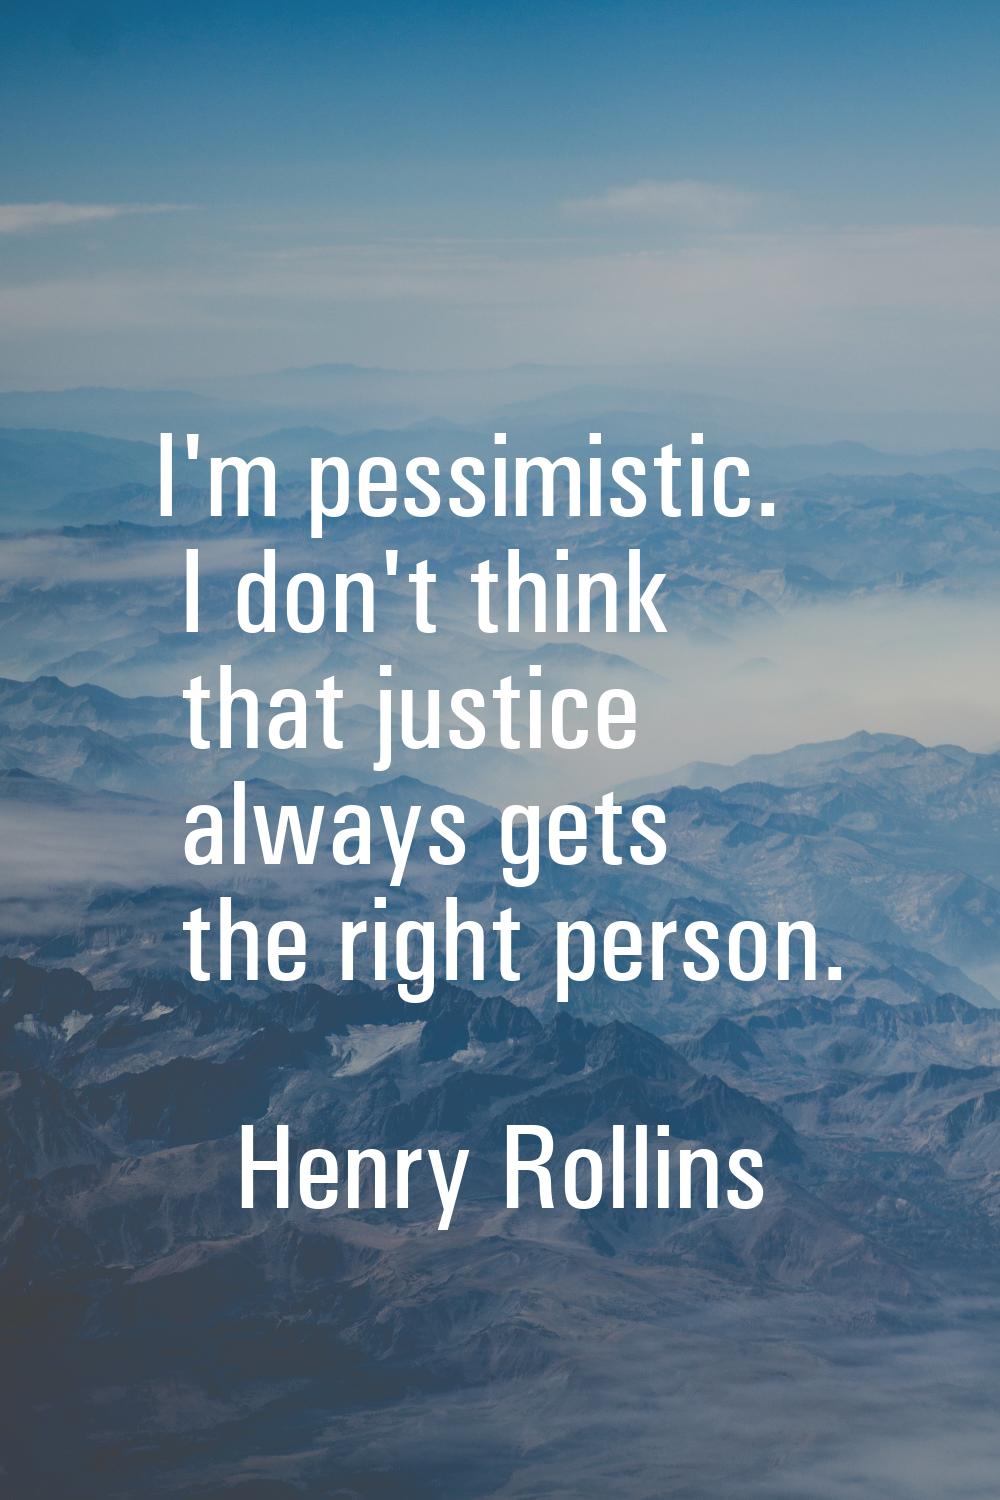 I'm pessimistic. I don't think that justice always gets the right person.